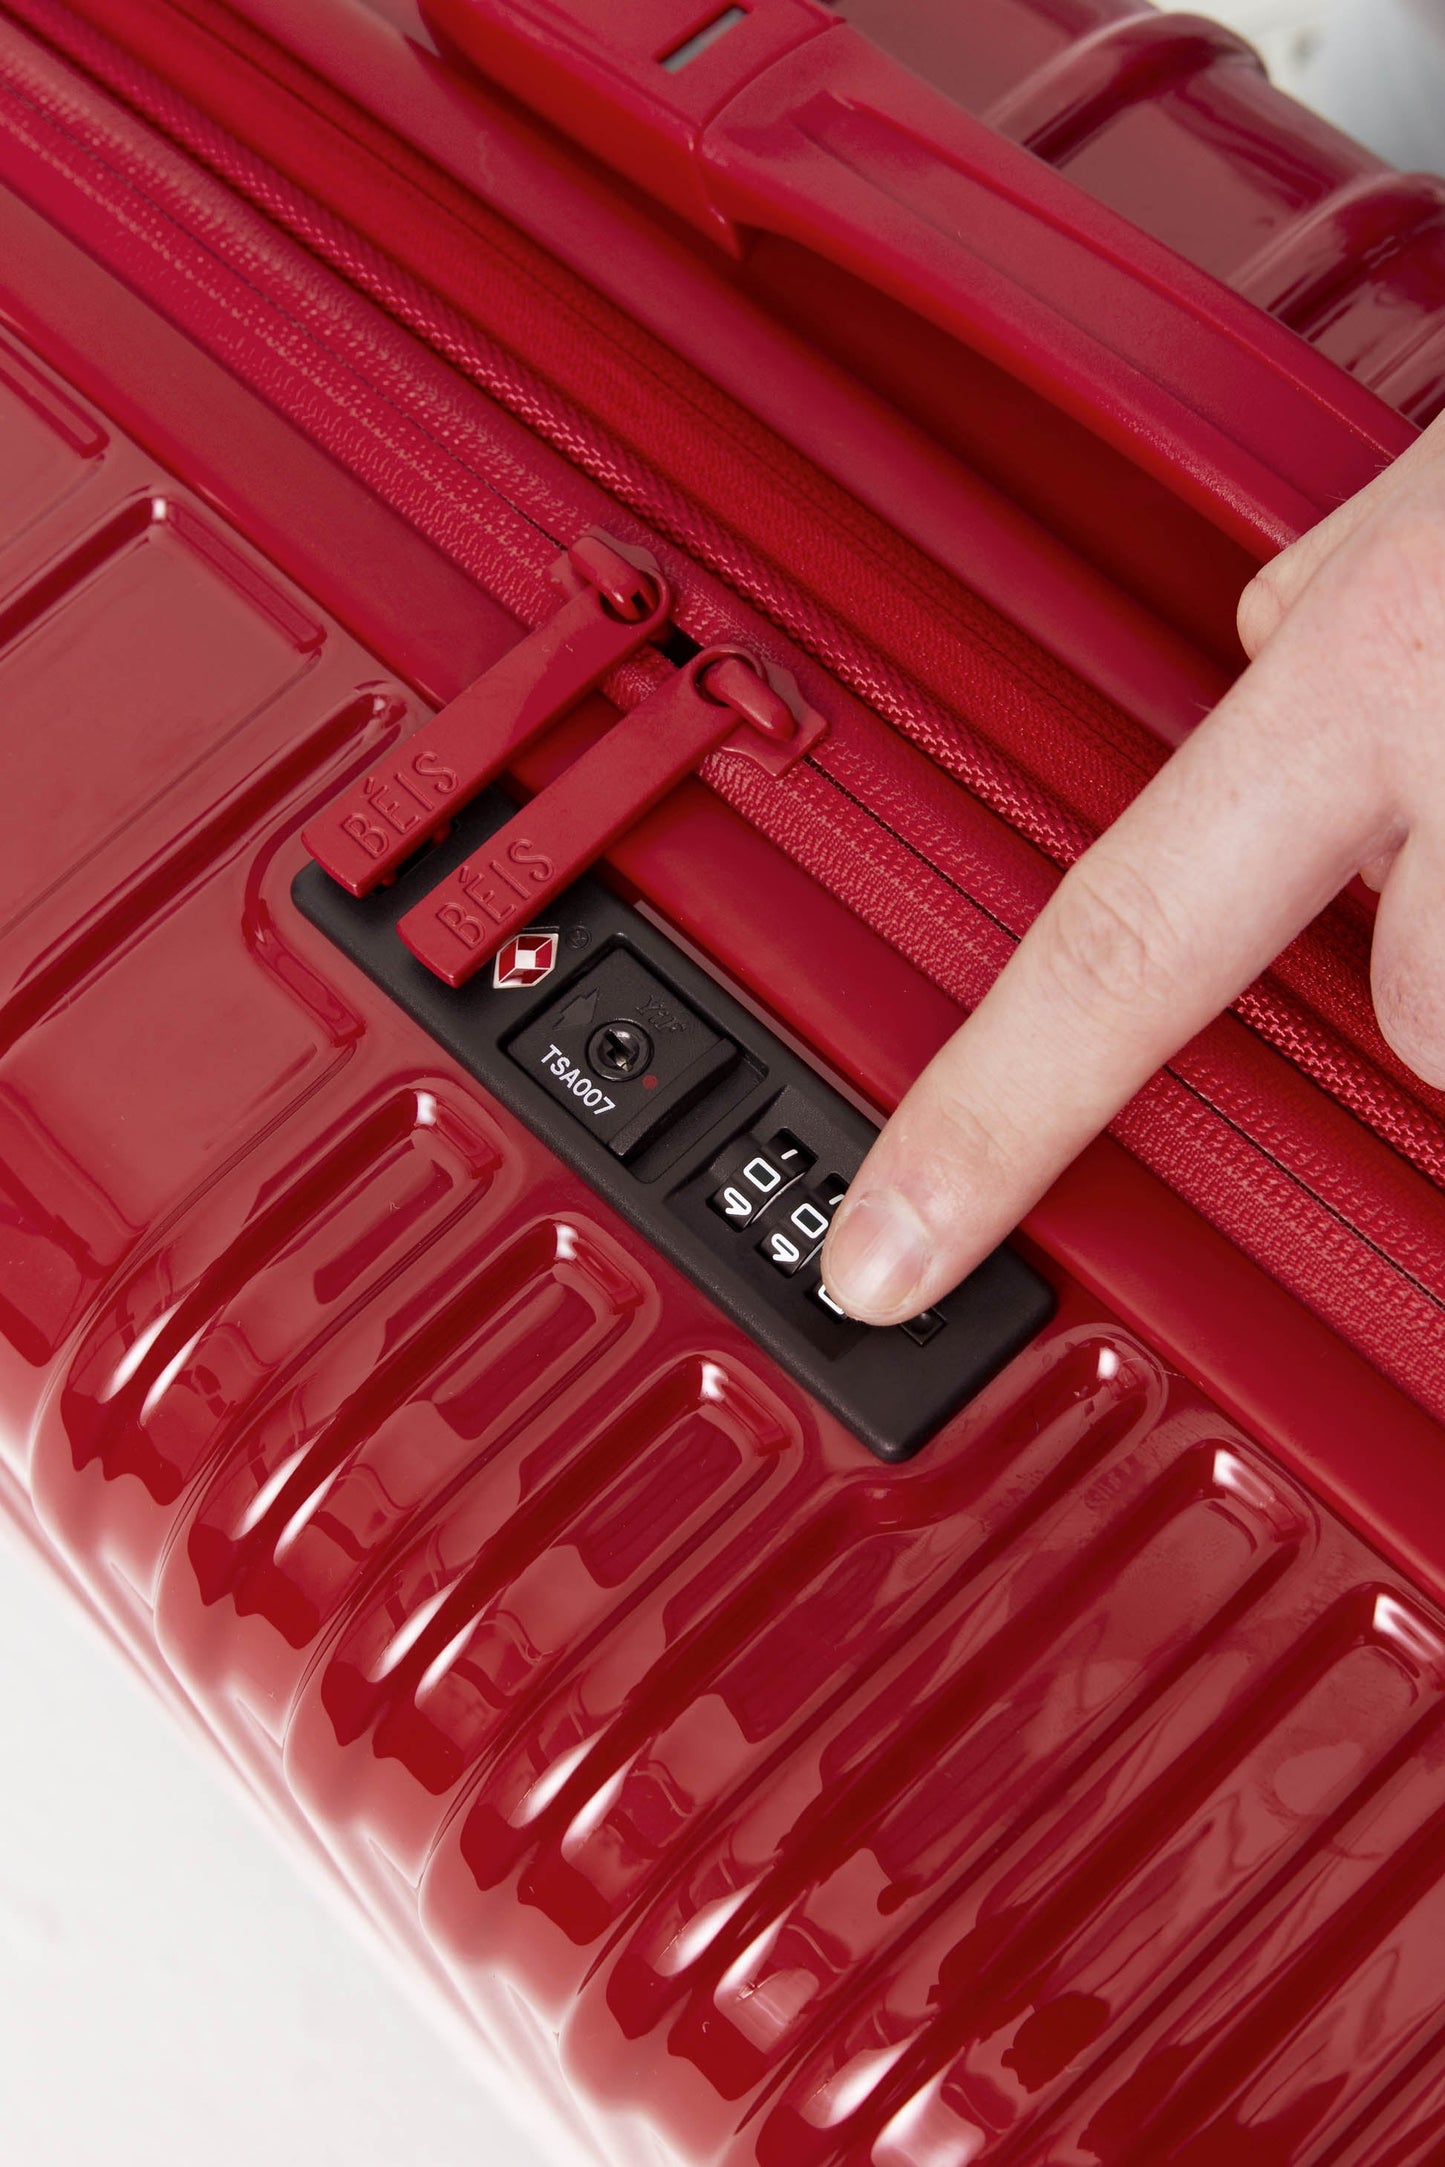 Le Carry-On Roller en Text Me Red